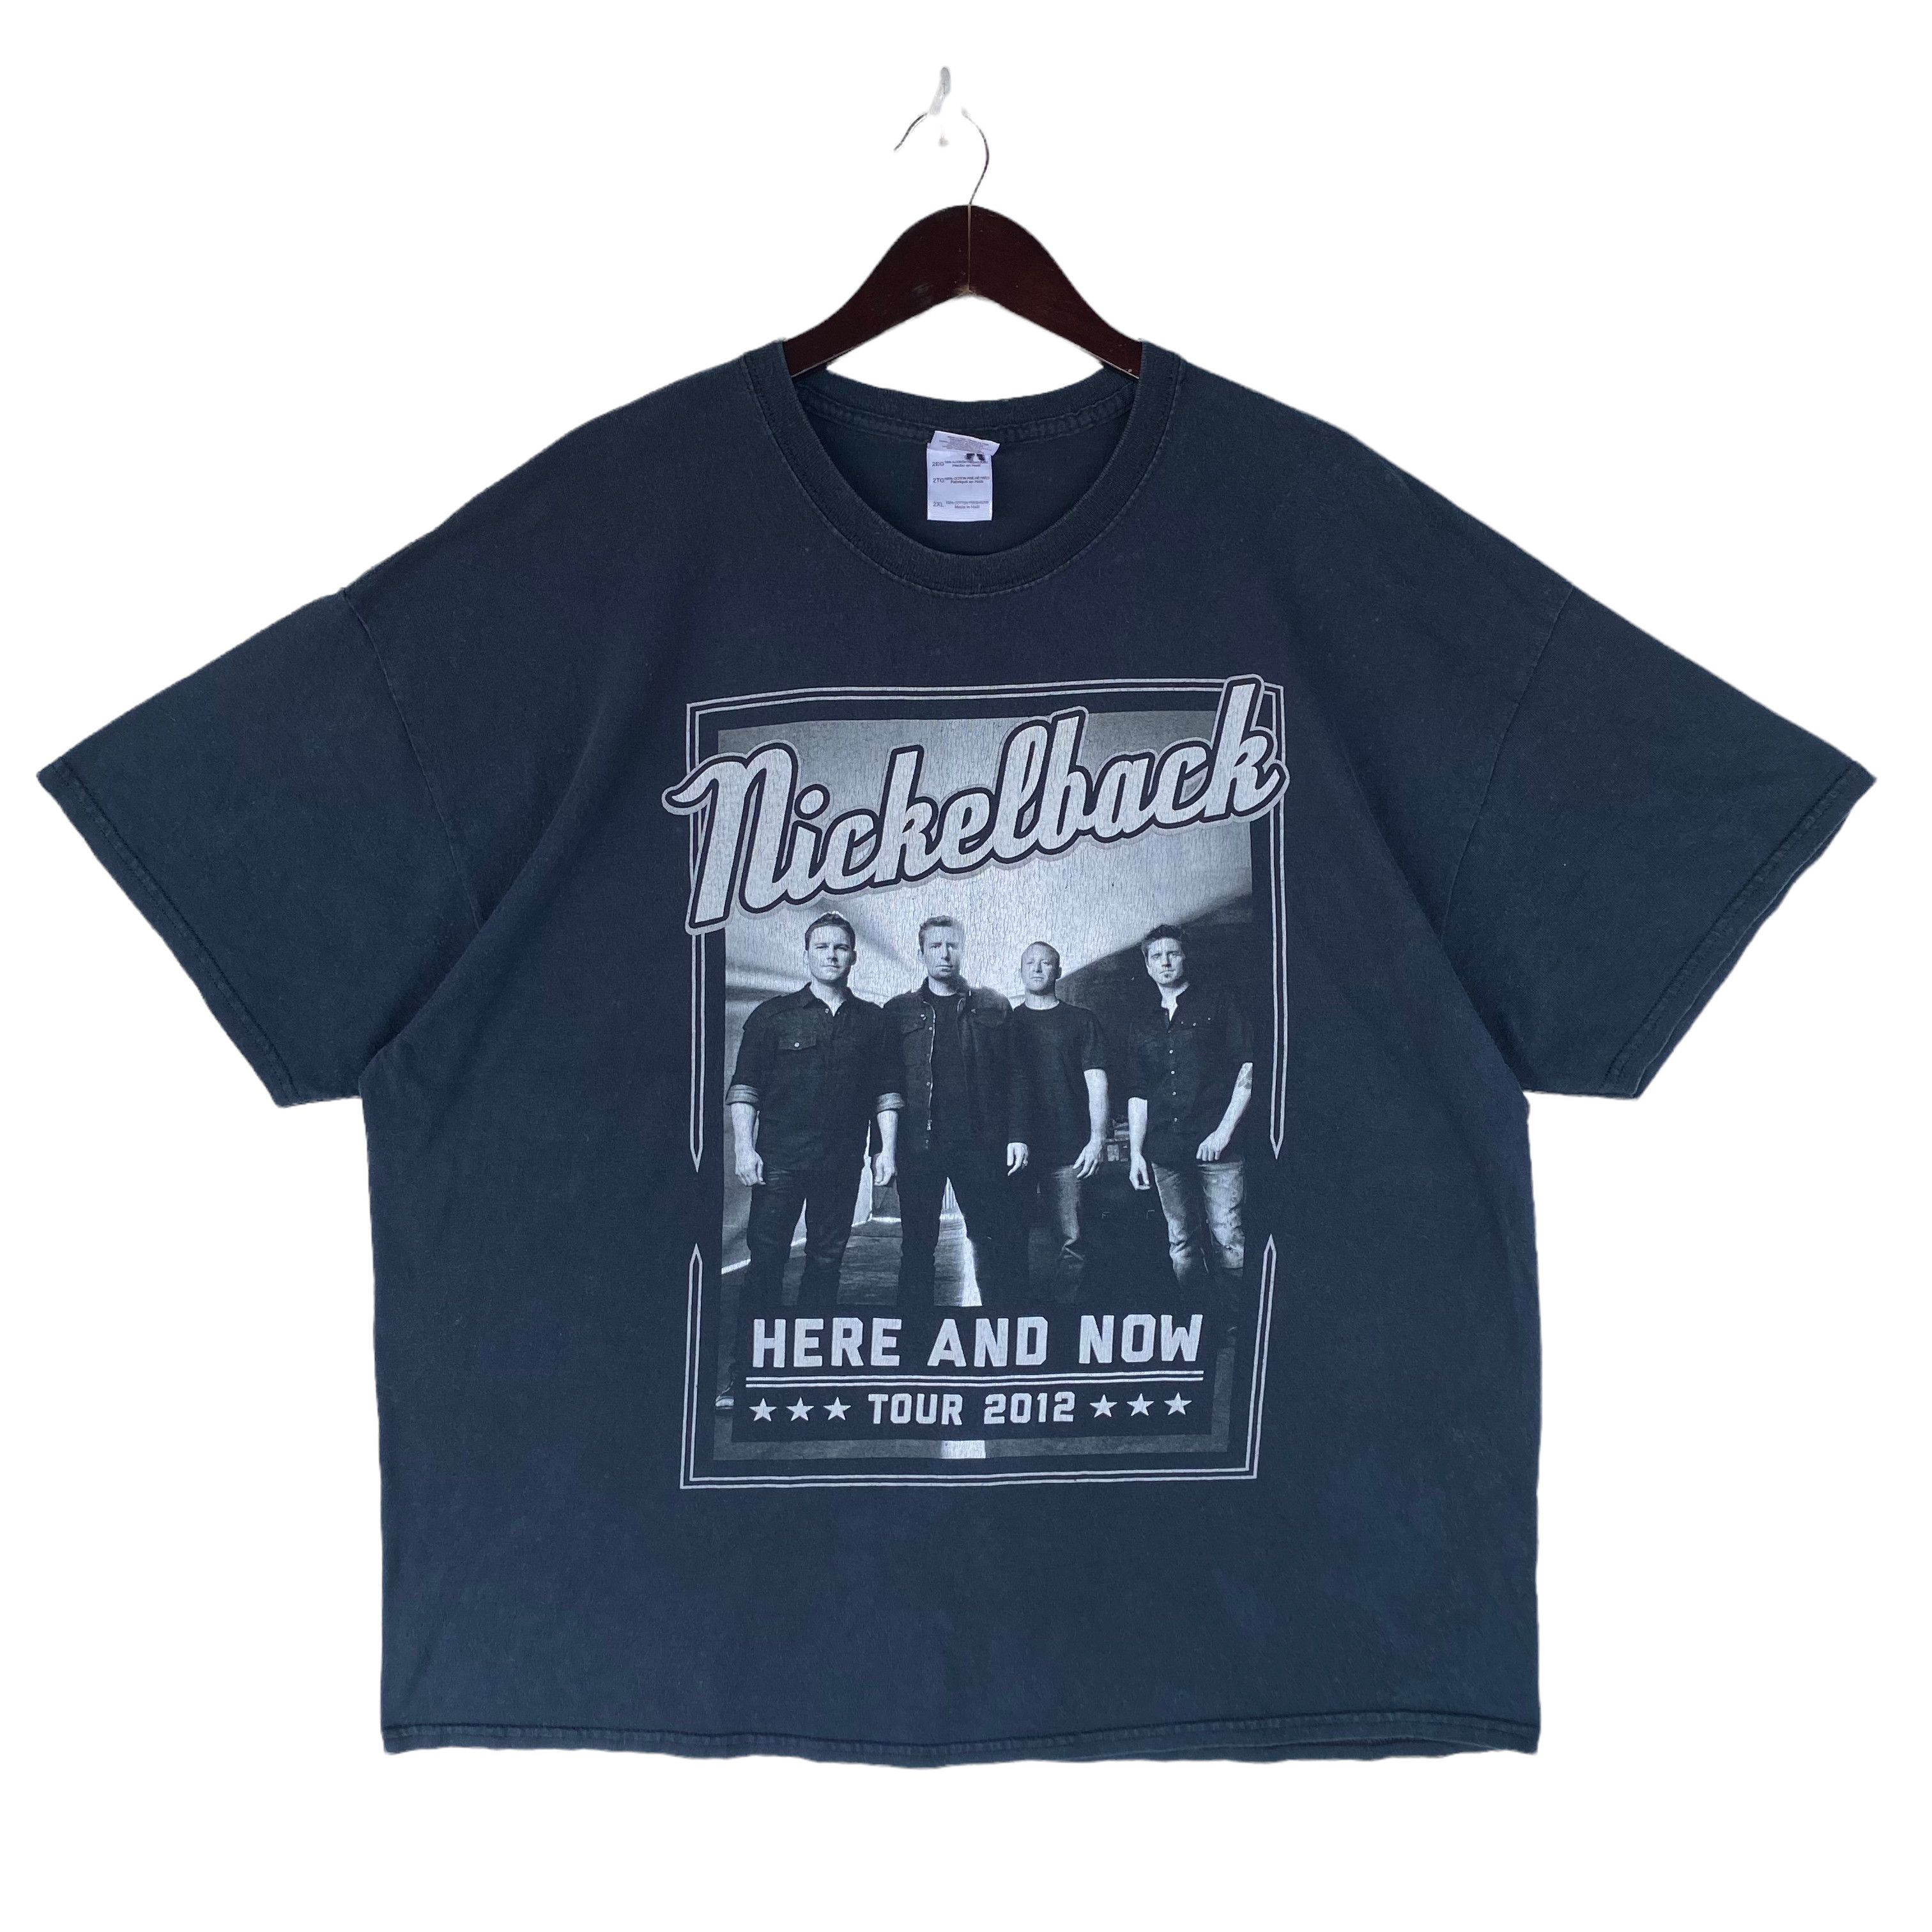 Tour Tee NICKELBACK hard rock band here and now tour 2012 shirt Size US XXL / EU 58 / 5 - 1 Preview